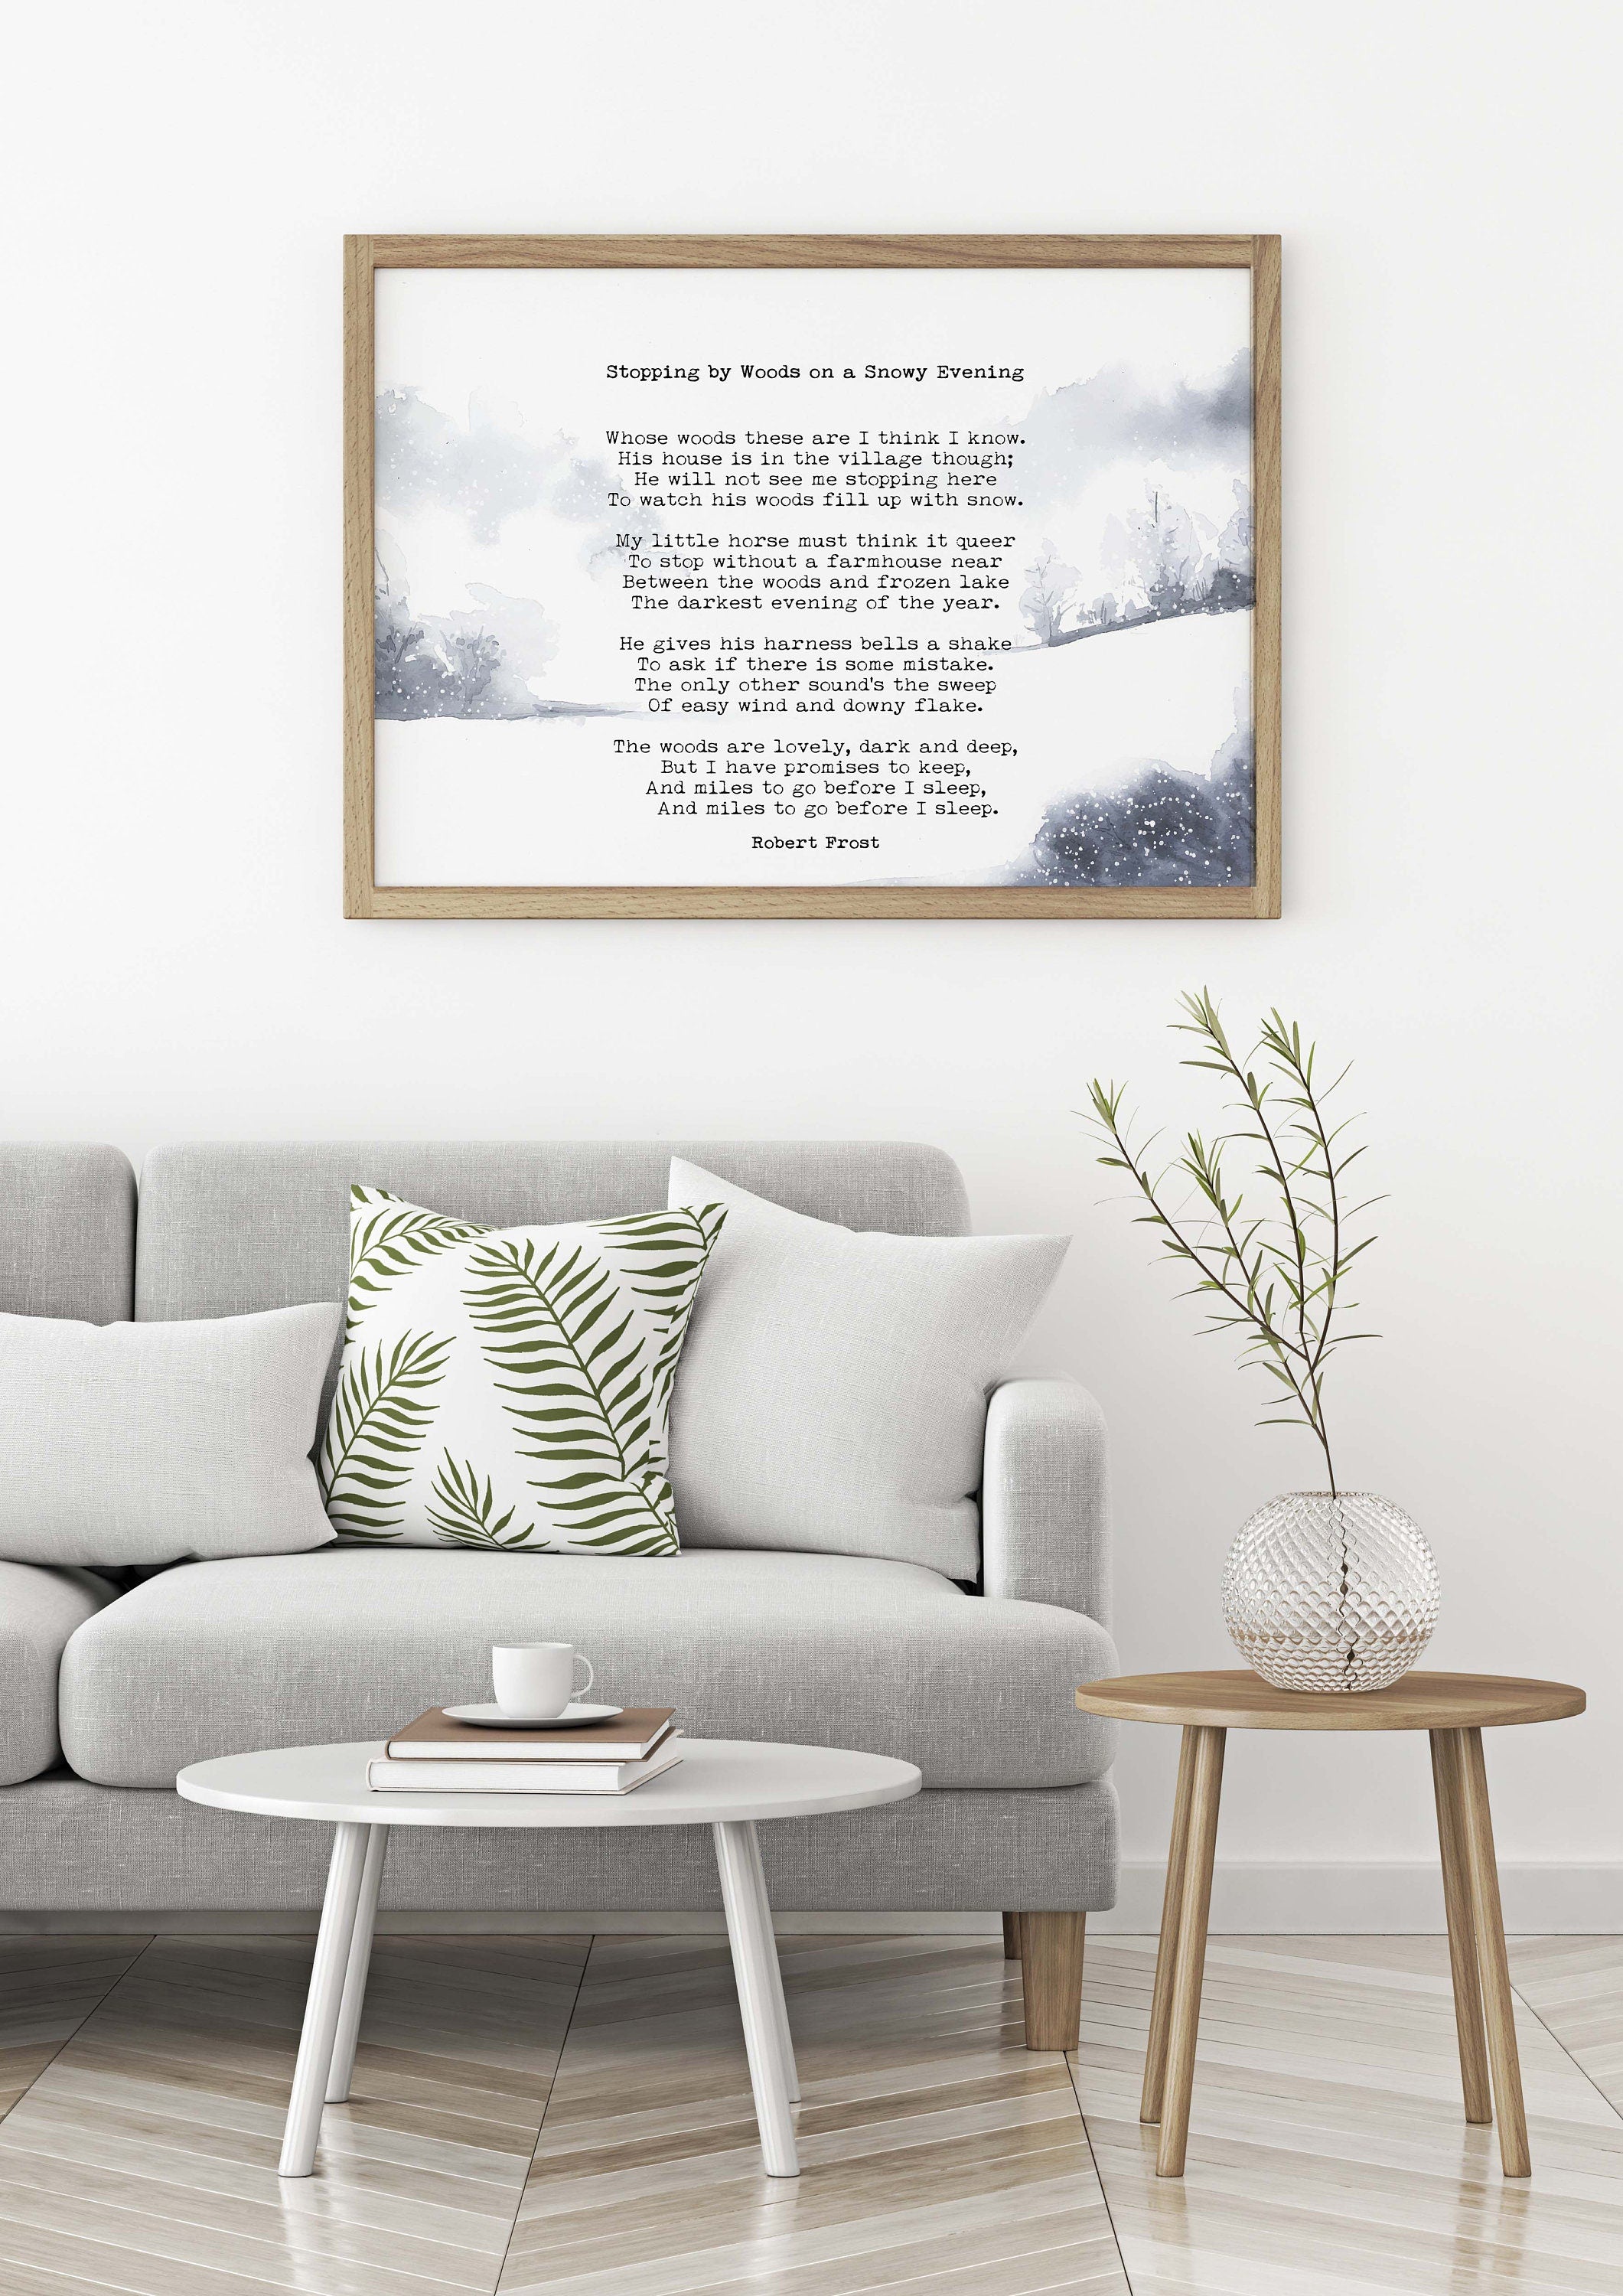 Stopping by the Woods on a Snowy Evening Robert Frost Wall Art Print with Watercolour Landscape for Living Room Wall Art, Unframed or Framed